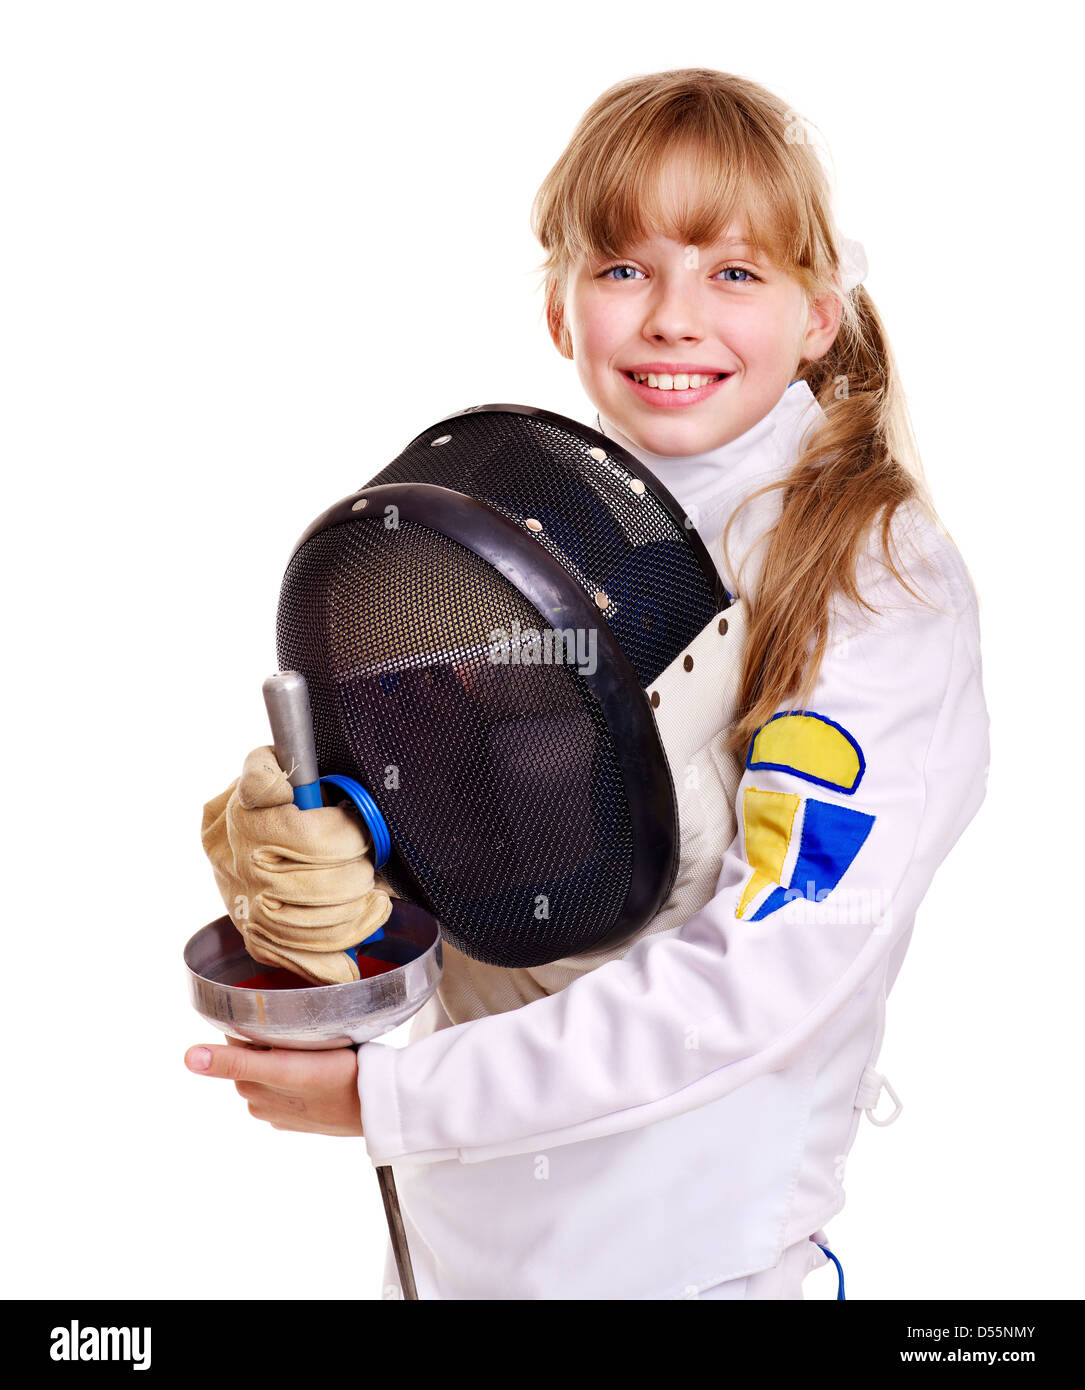 Child in fencing costume holding epee . Stock Photo